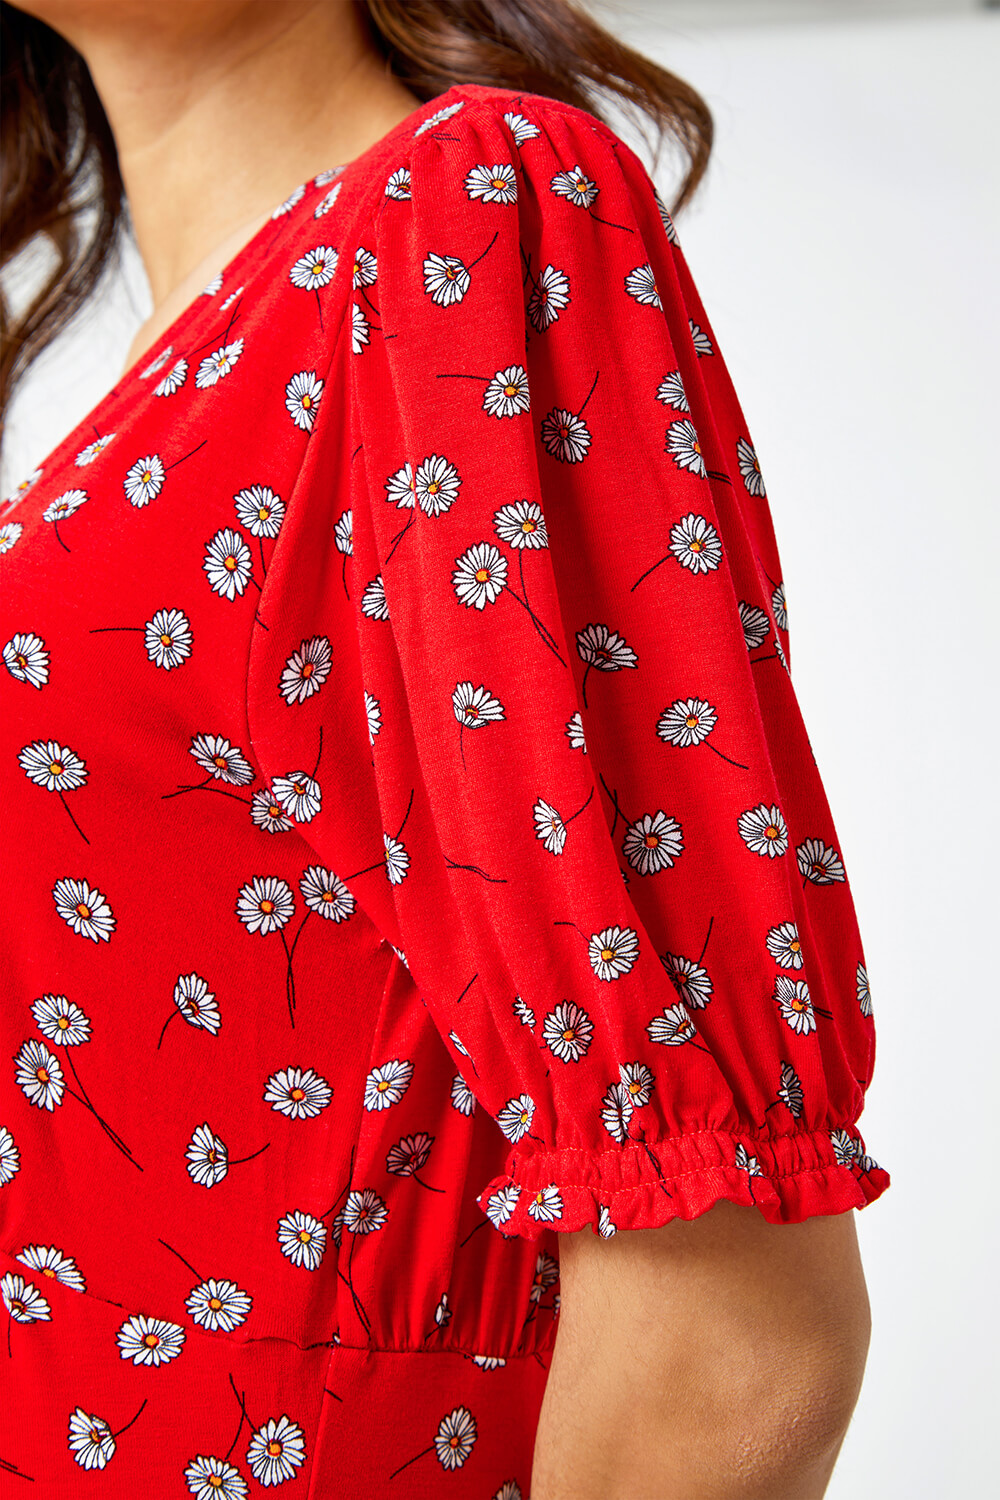 Red Floral Print Frill Tea Dress, Image 5 of 5